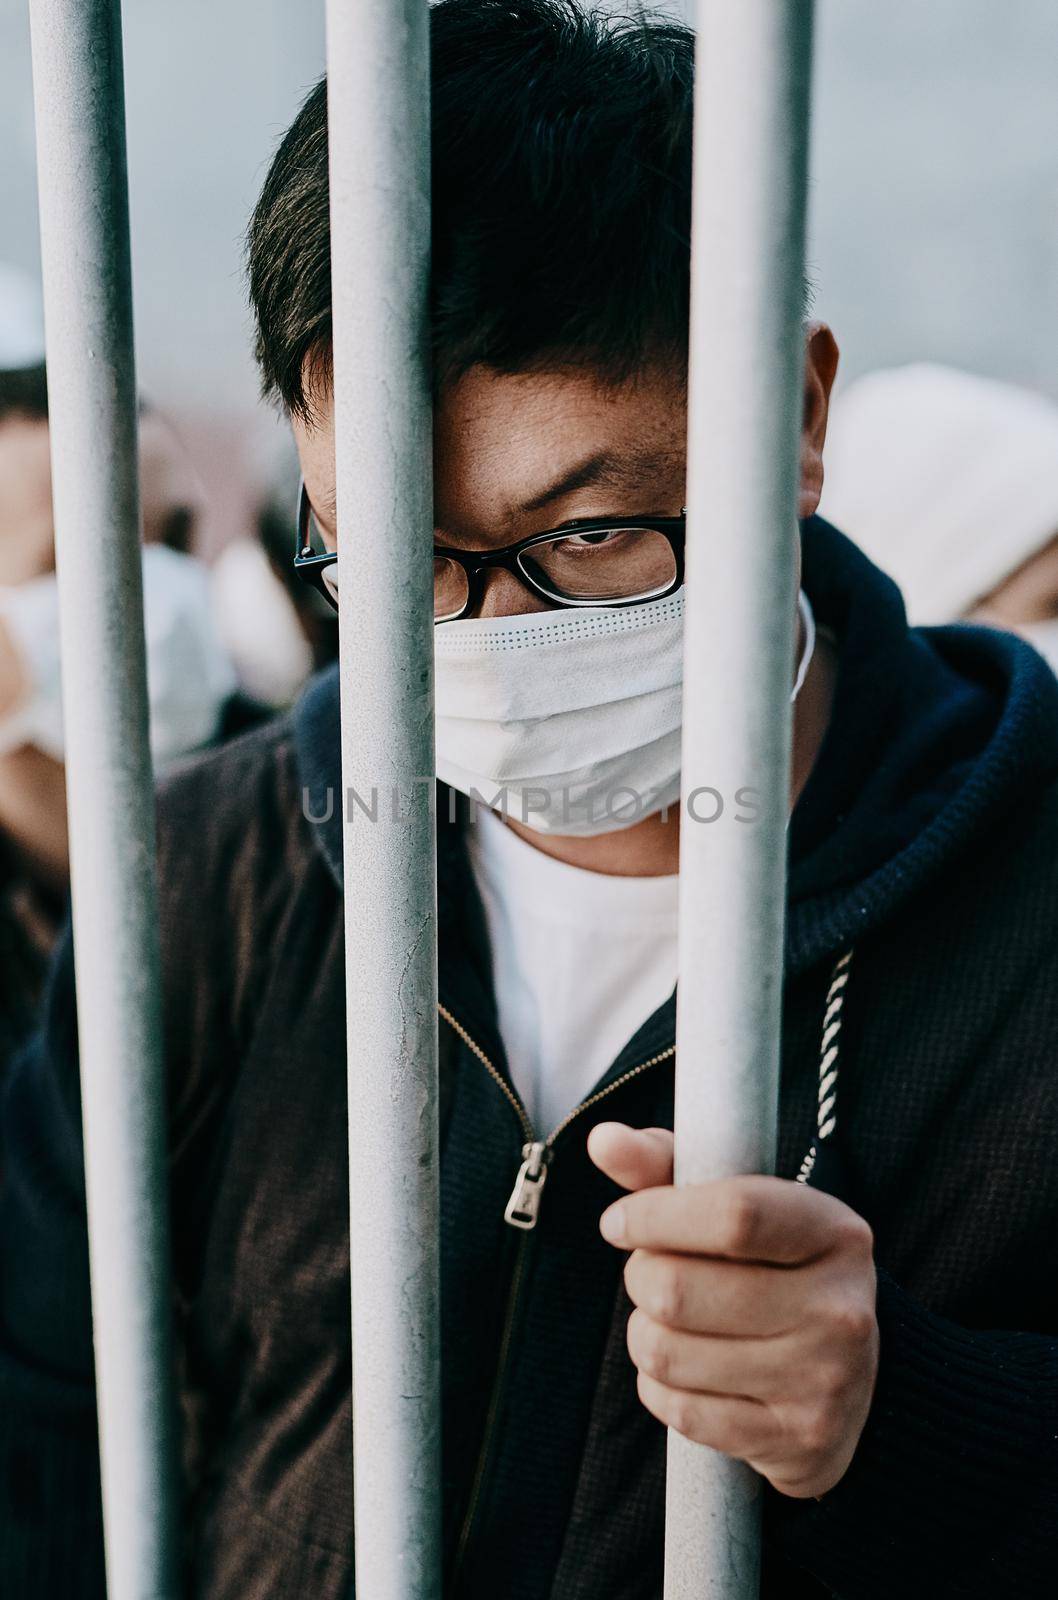 Lockdown, isolation and covid travel ban with a man in a mask behind bars during an international pandemic. Corona virus restrictions, feeling like a prisoner or captive during a global shutdown.